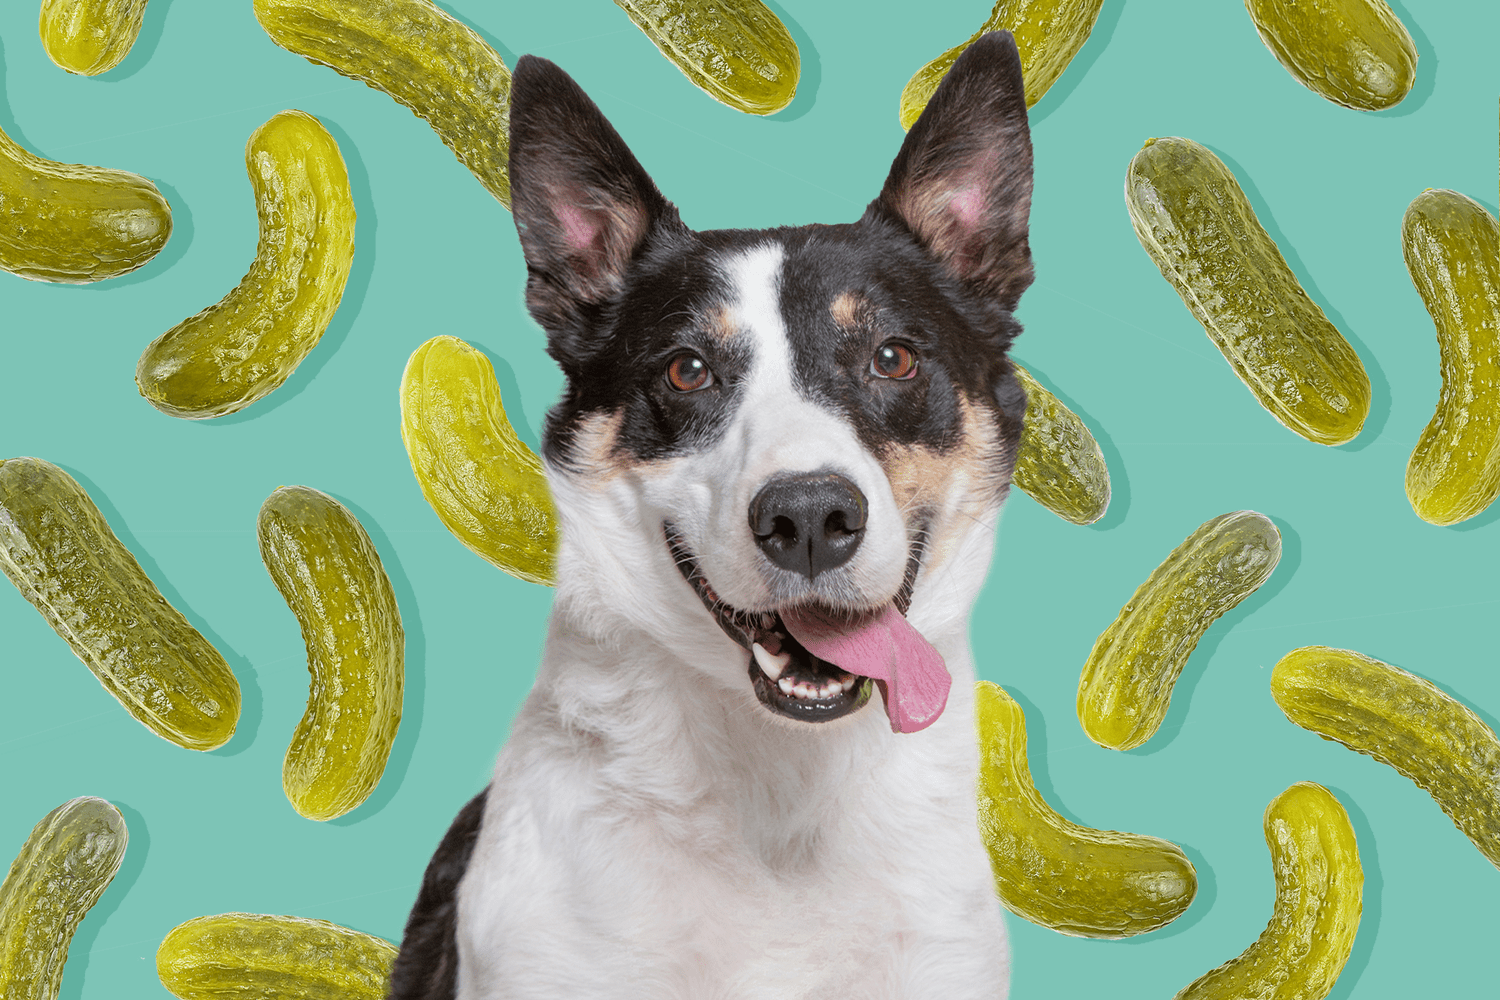 Should You Let Your Dog Eat Pickles? - Daily Paws